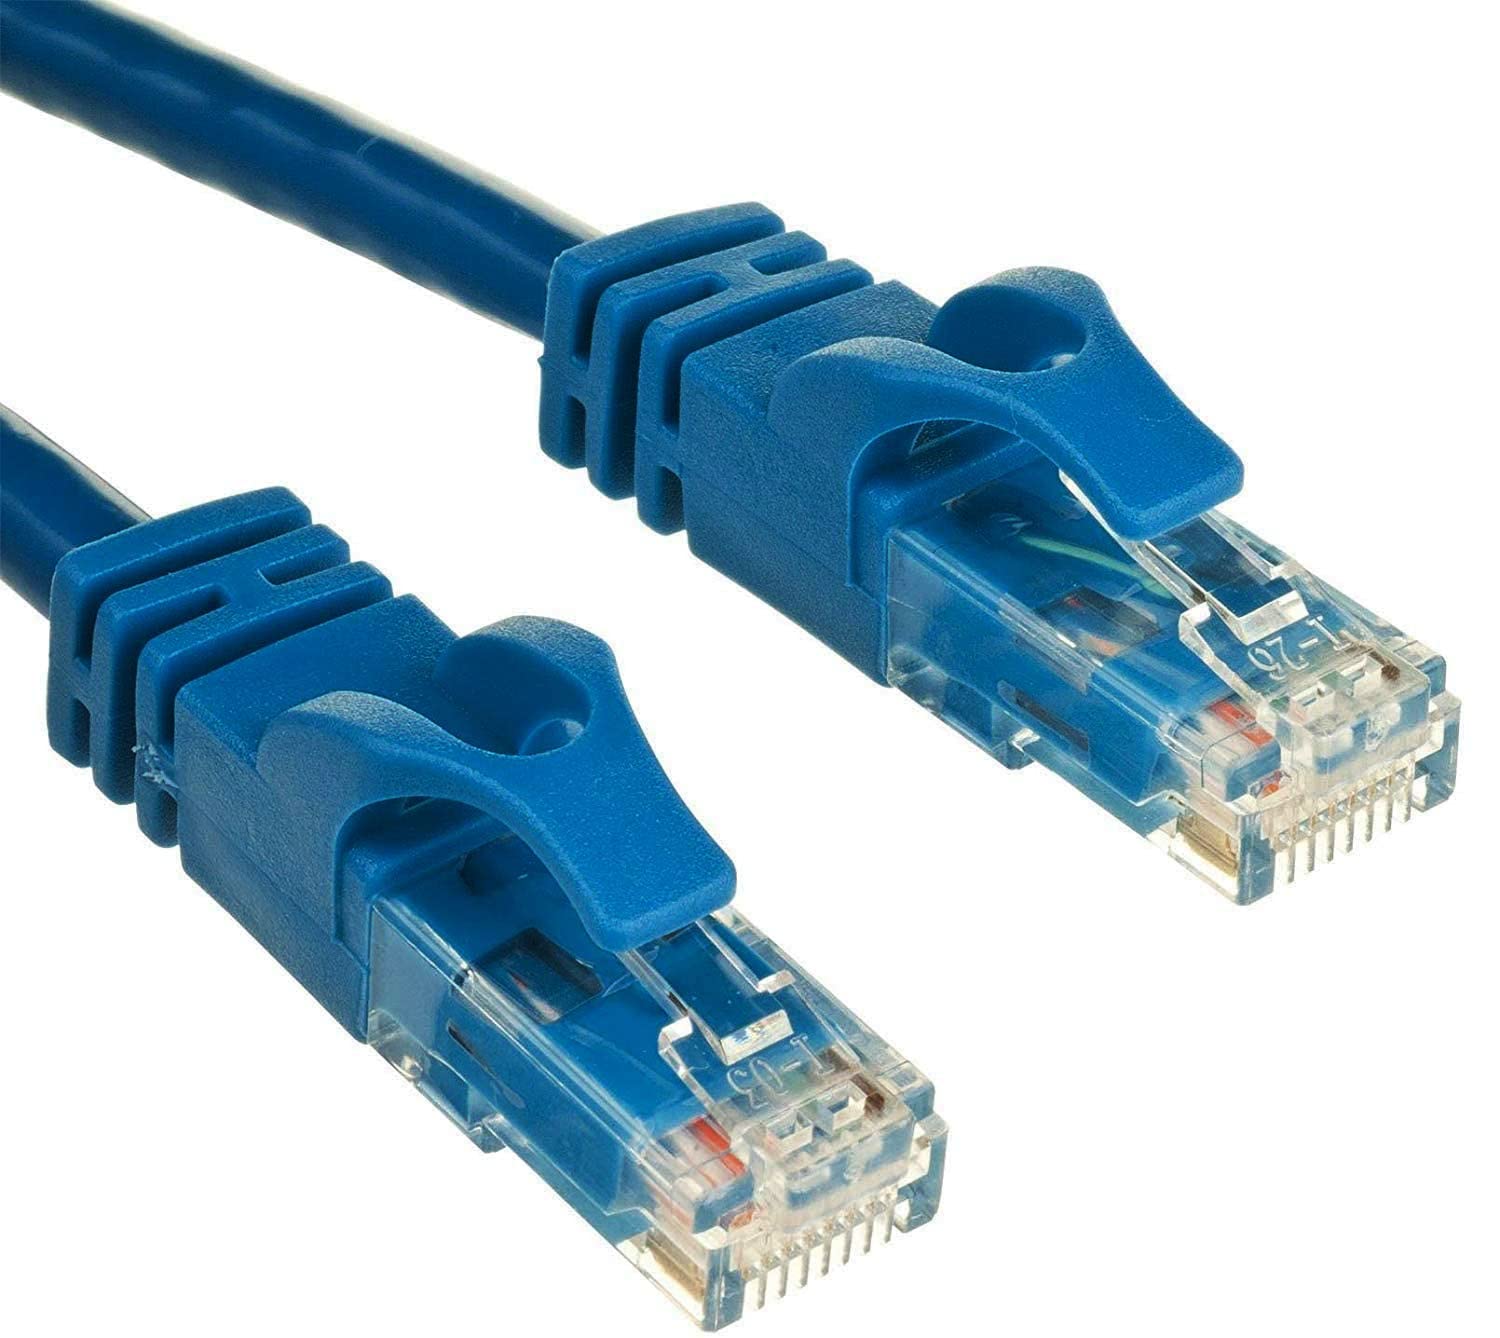 Patch Cord HD Cat6 14 Foot (PC614FT-BL) (Blue) New